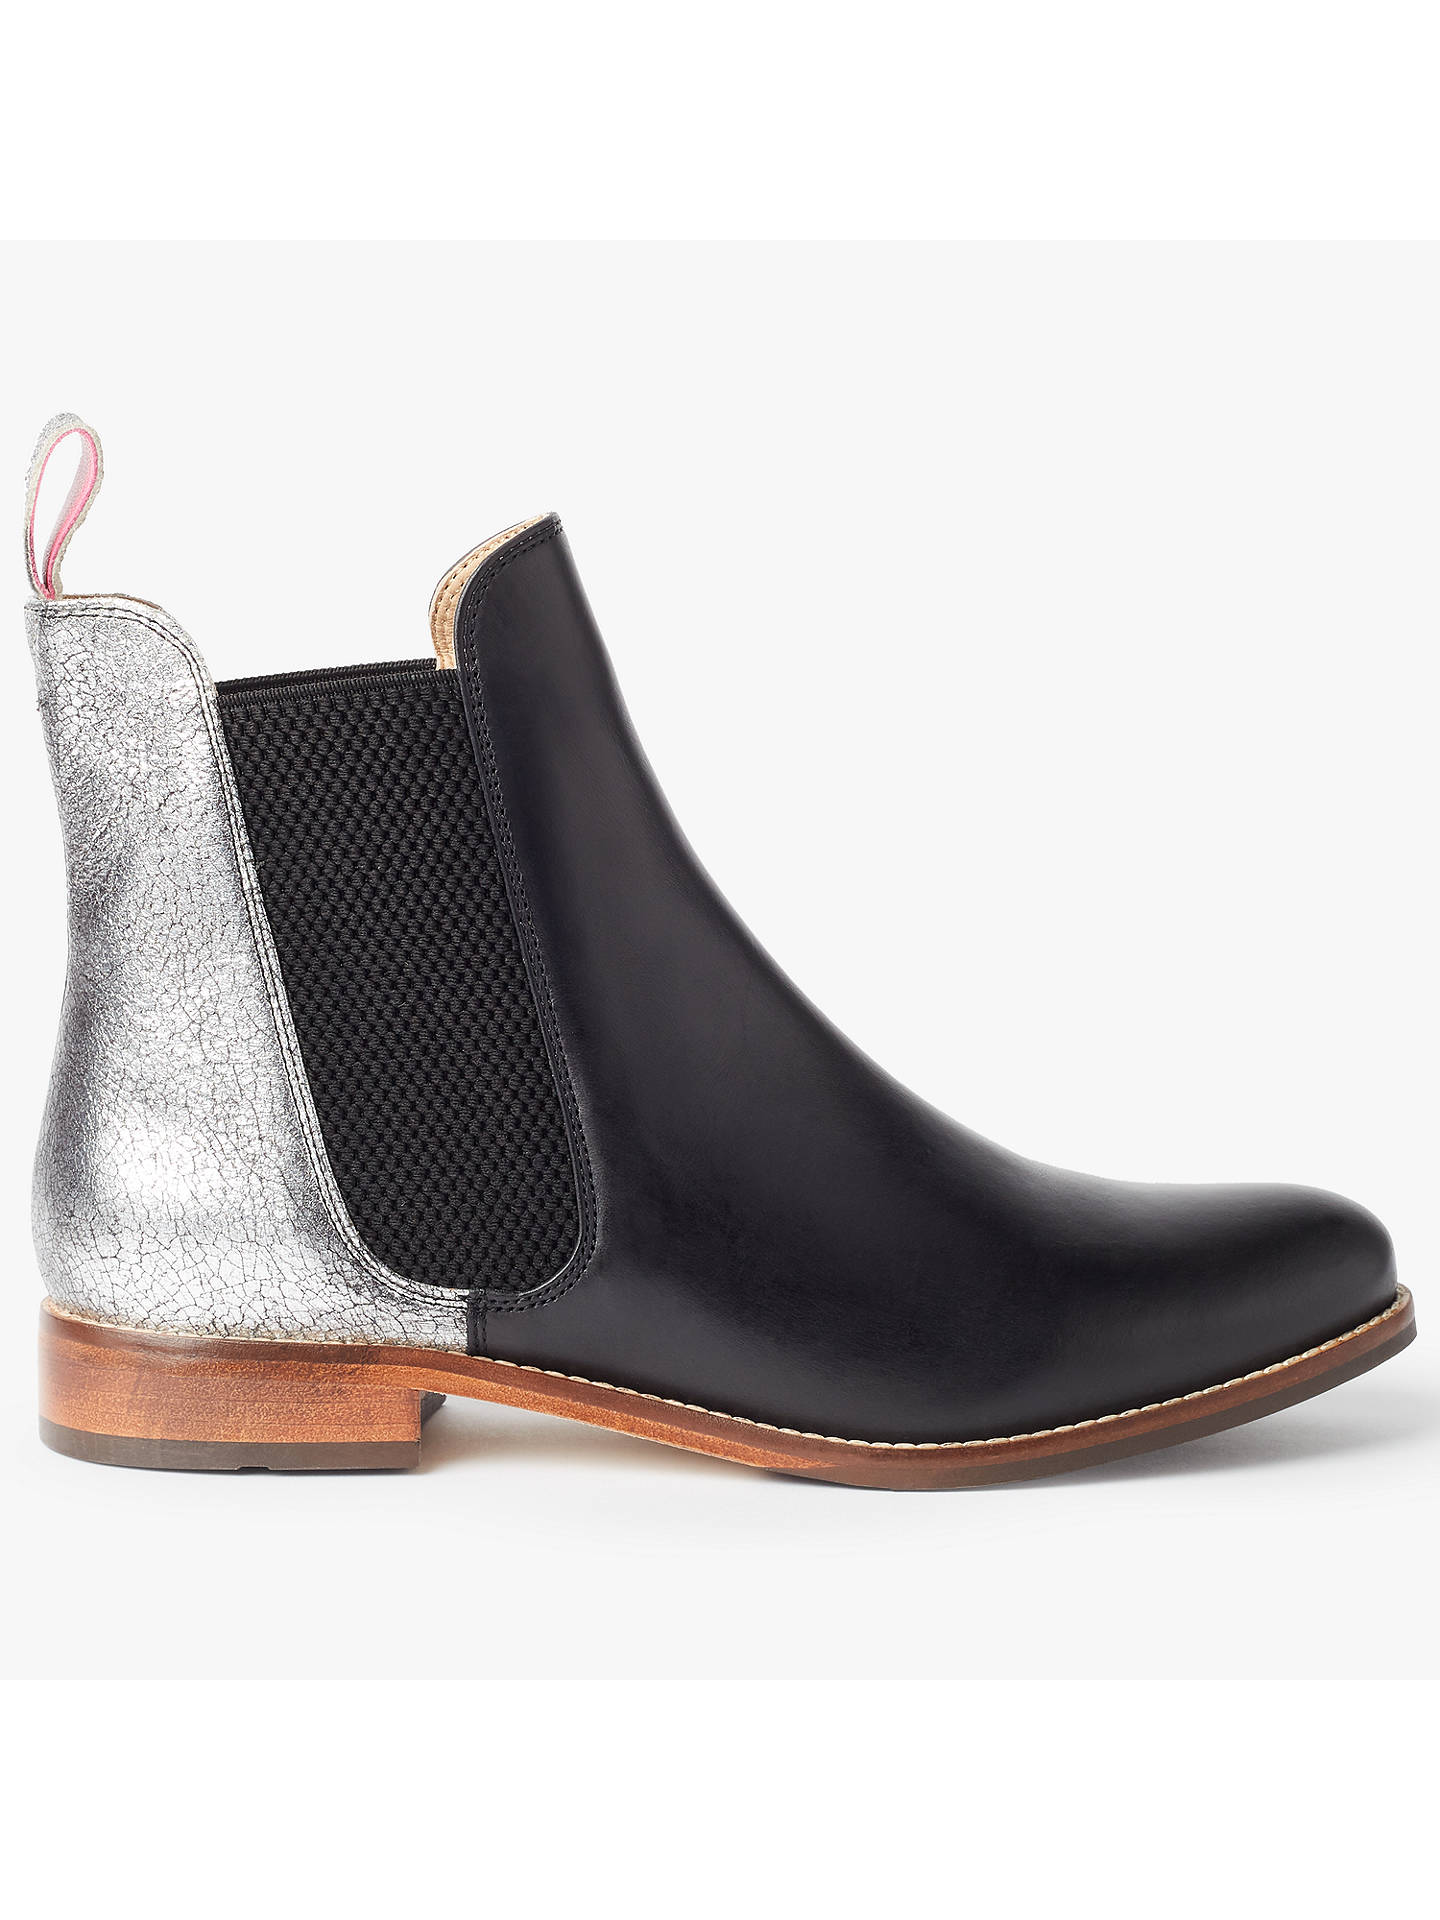 Joules Westbourne Leather Chelsea Boots at John Lewis & Partners